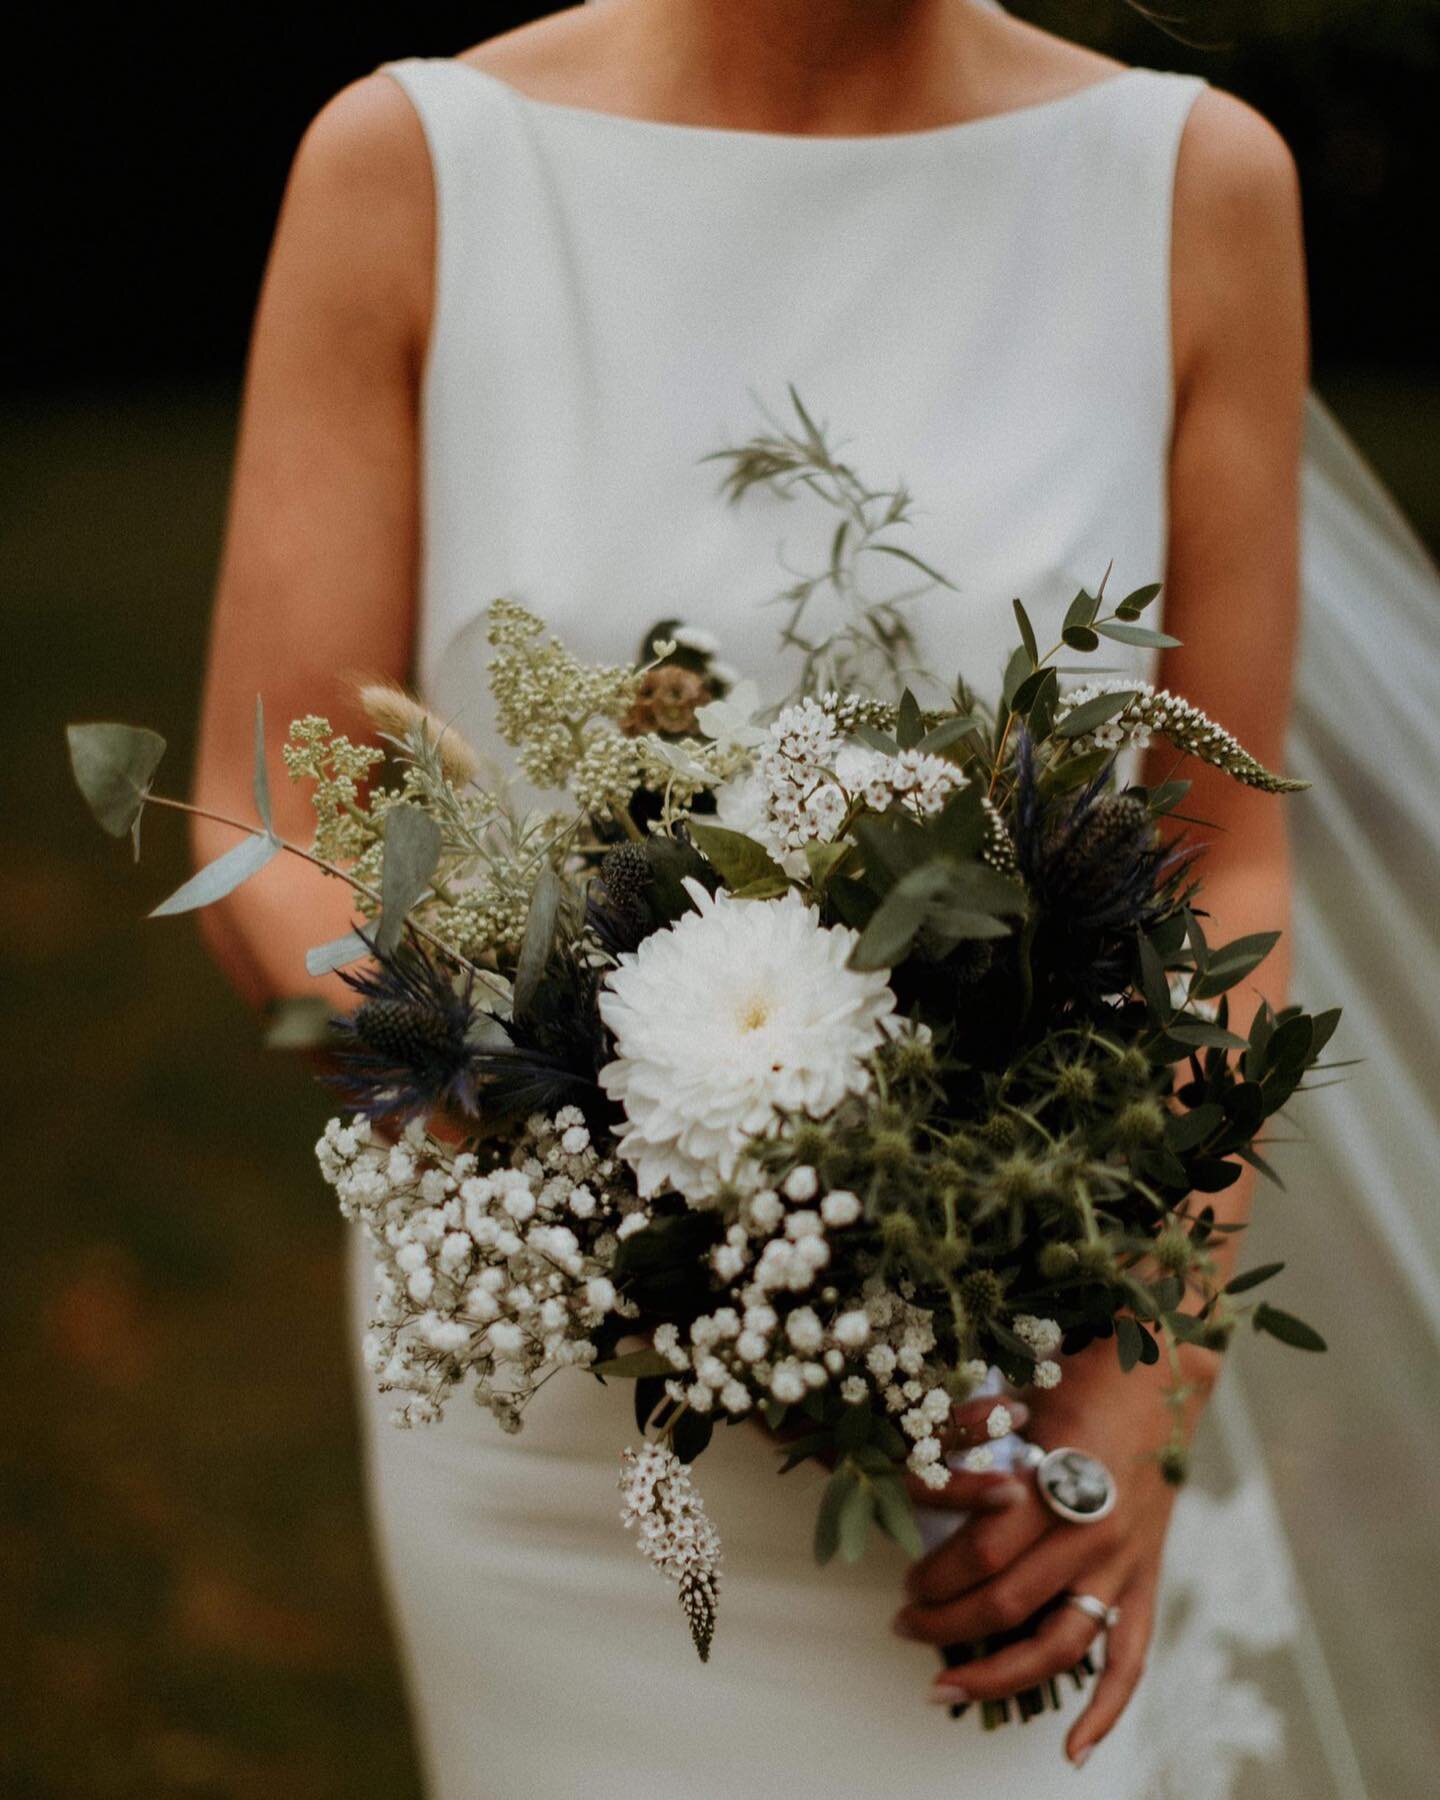 Embracing the beauty of imperfection with this wild, unstructured bouquet in ethereal whites and greens 🌿👰 #wildbeauty #unstructuredelegance

Wedding bouquet and memory charm: @whisperingvintage 
Photography: @carolinasegre 
Wedding dress: @jesperh